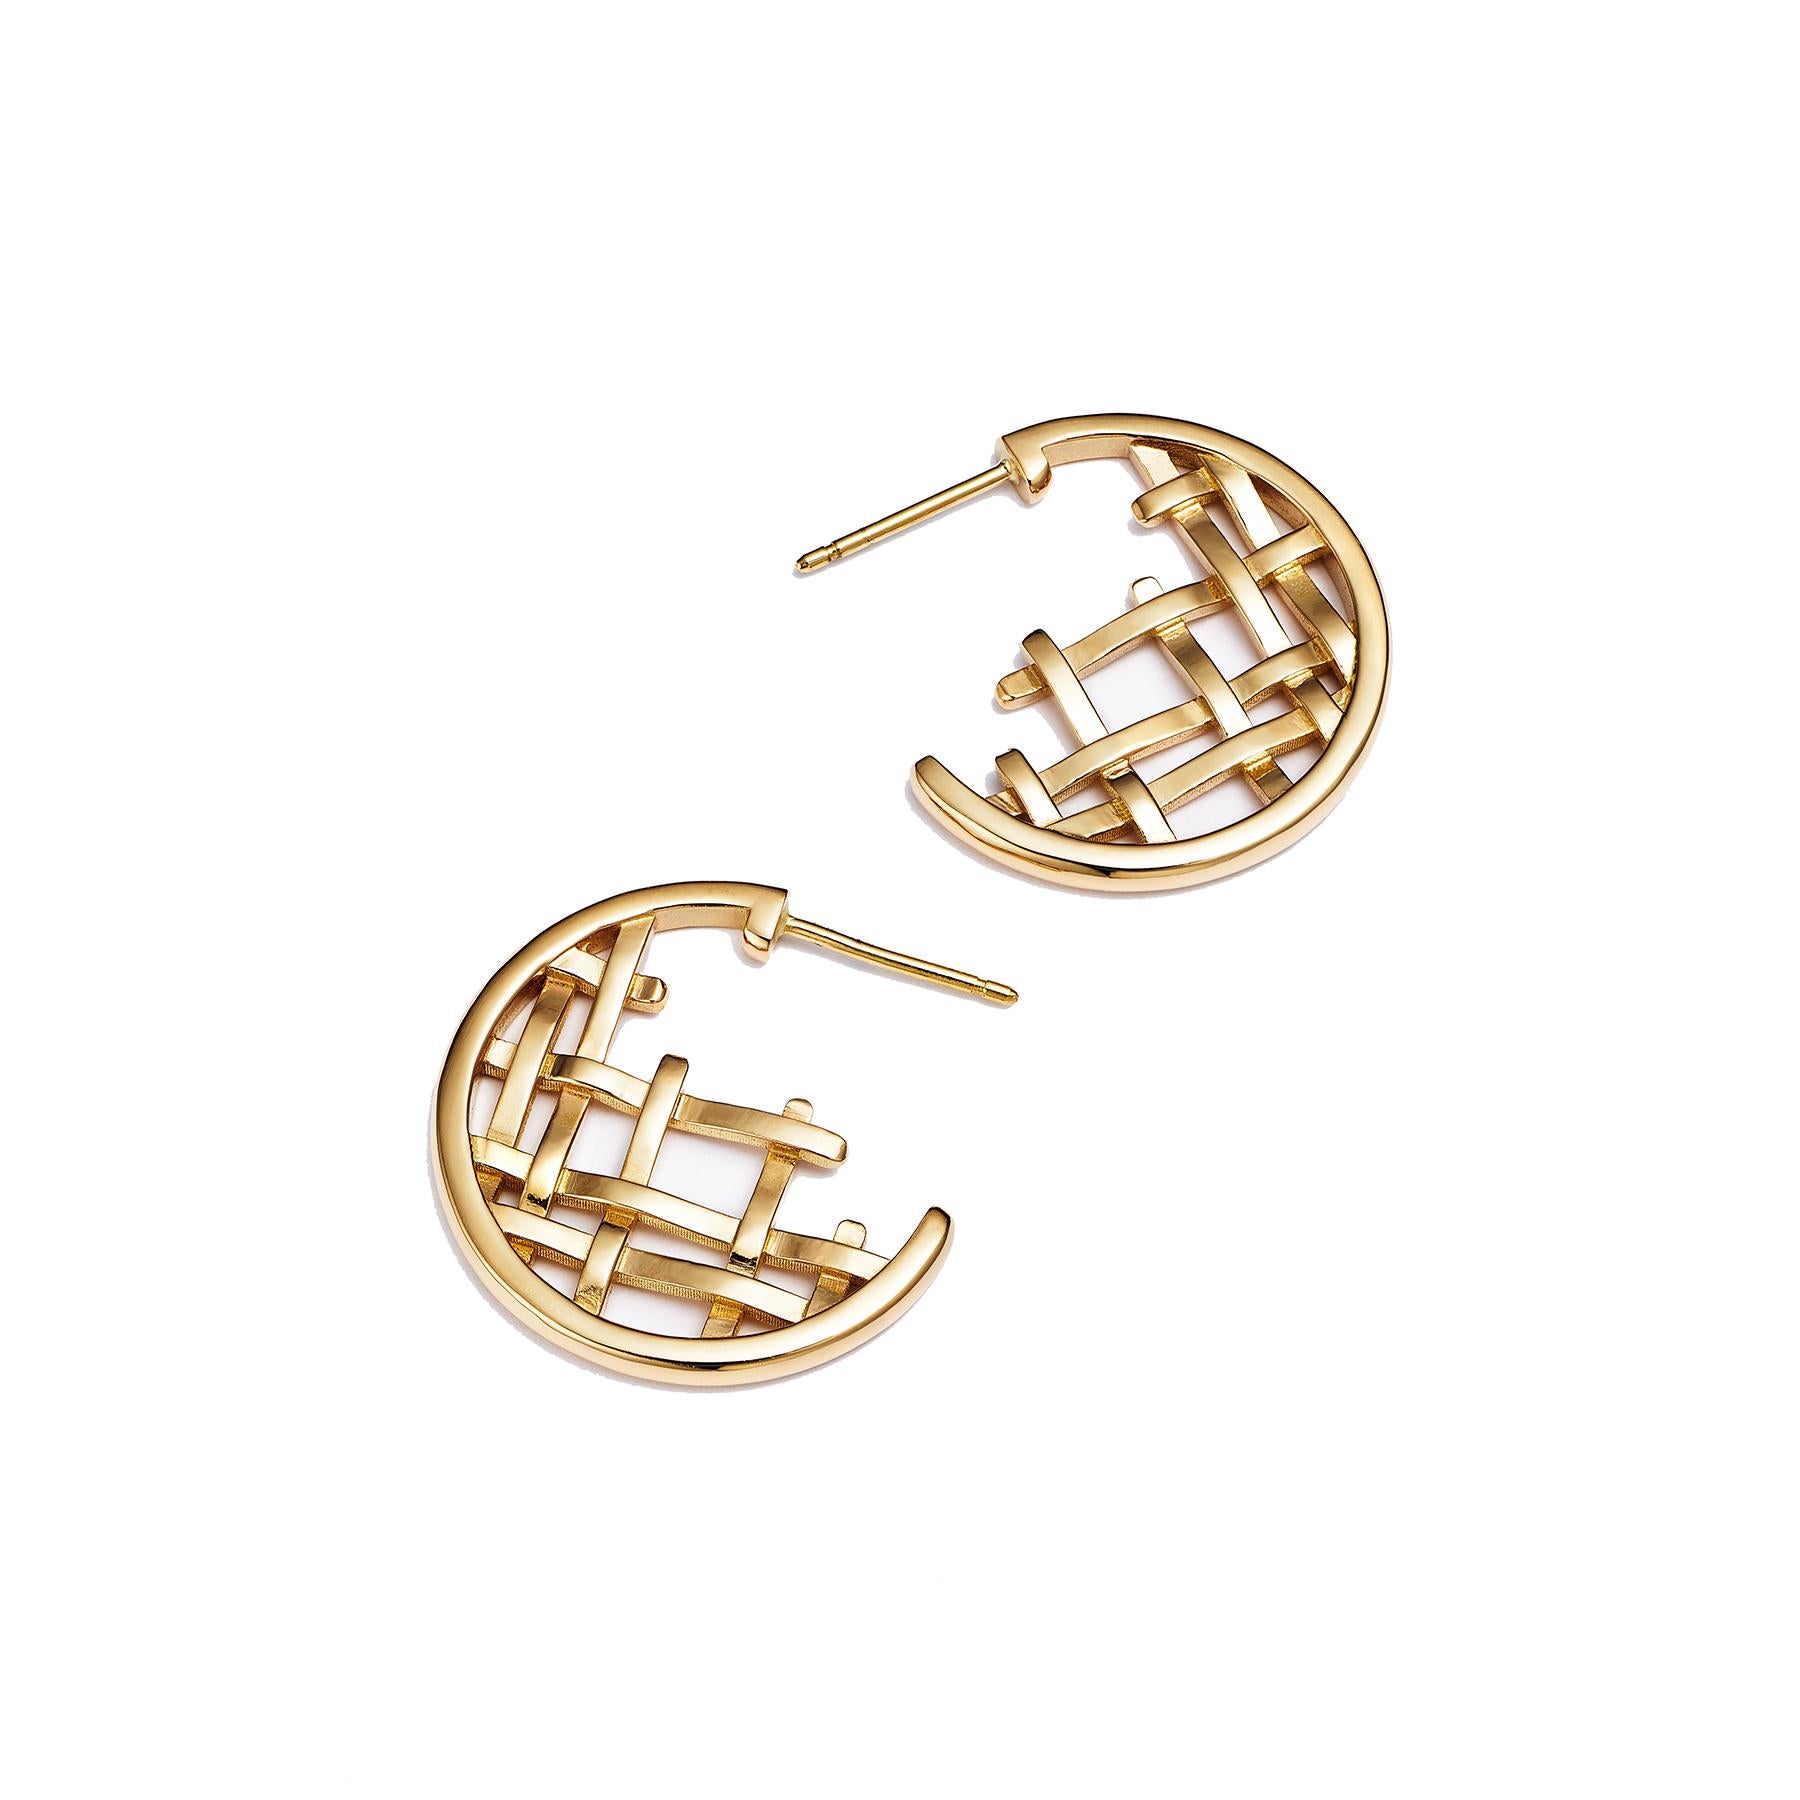 The Yuna earrings are a harmonious blend of traditional Korean elegance and modern sophistication. Inspired by the intricate design of the Changdo, a traditional Korean window lattice found in Hanok houses, these earrings encapsulate the grace and